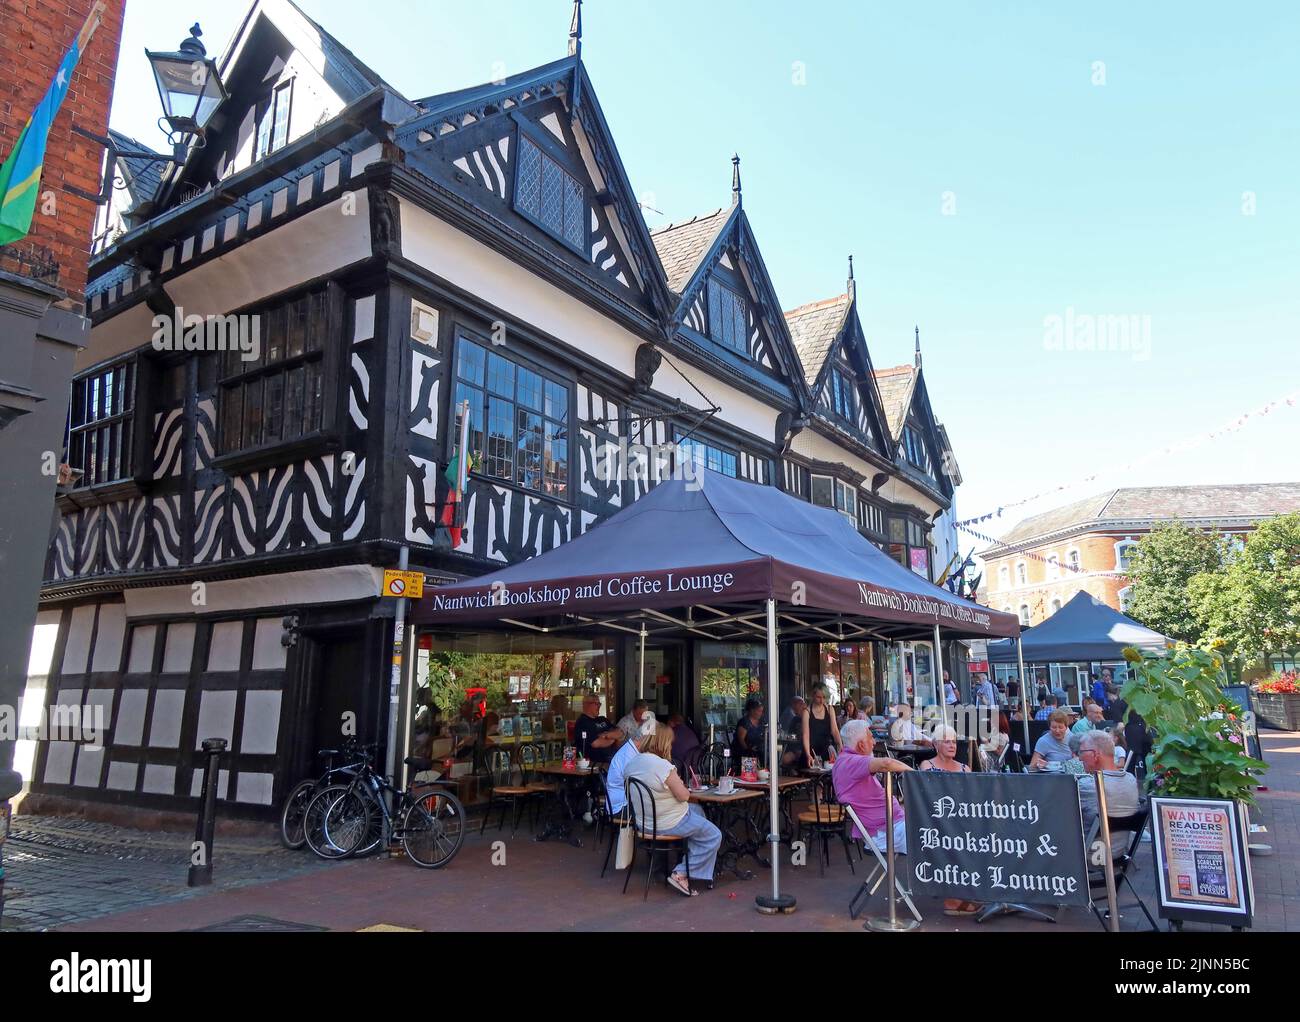 Black & White, traditional Tudor Timber framed building, Nantwich Bookshop and Coffee Lounge, 46 High St, Nantwich, Cheshire,England, CW5 5AS Stock Photo